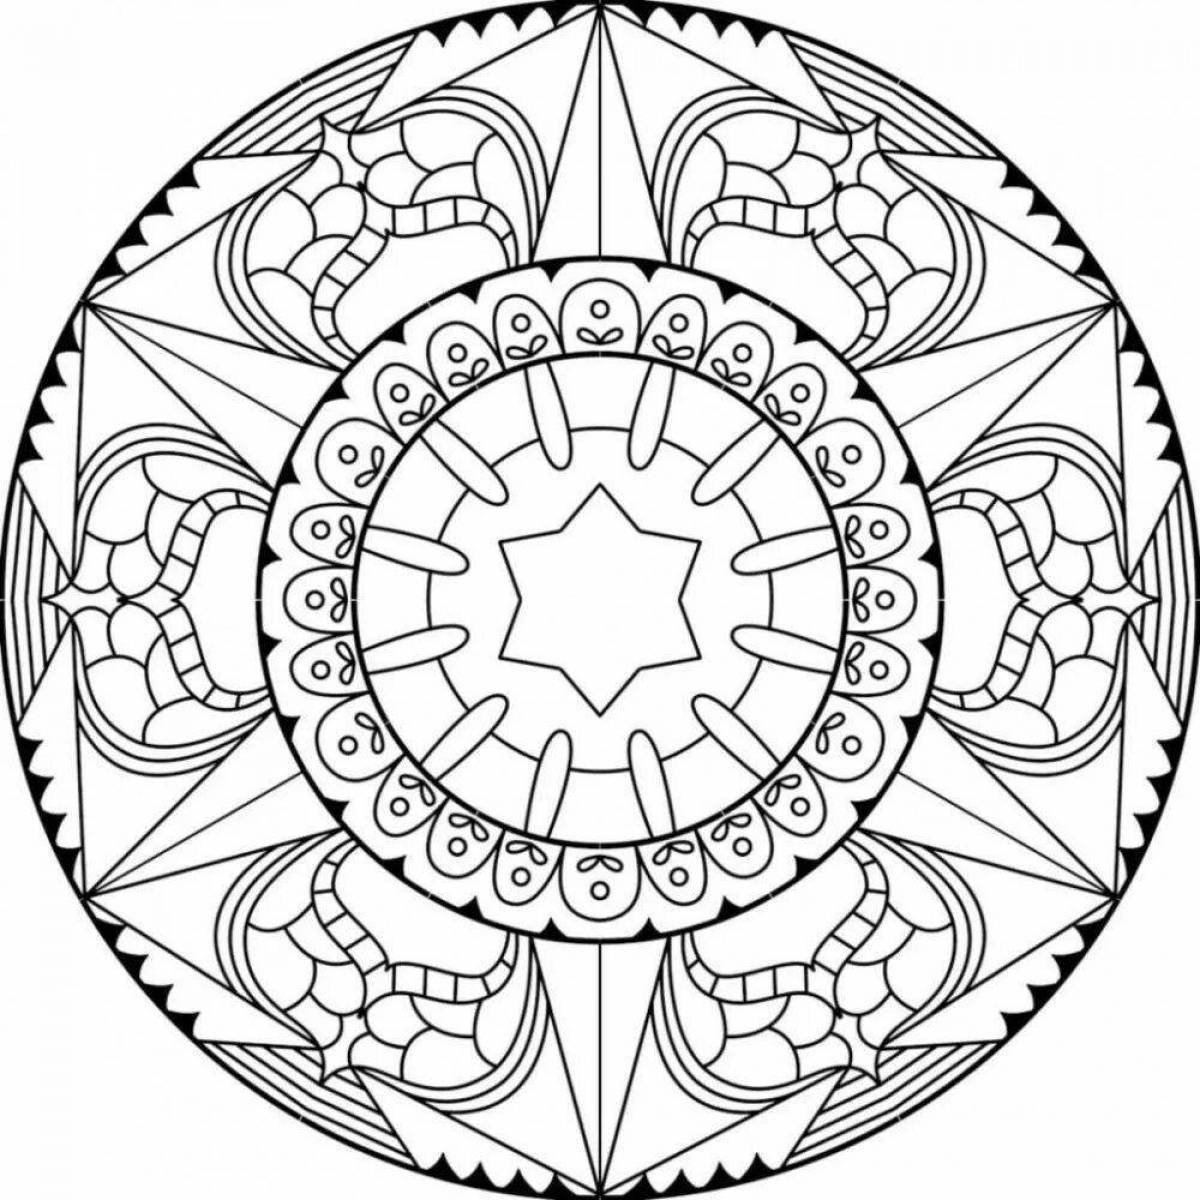 Soulful mantra coloring pages